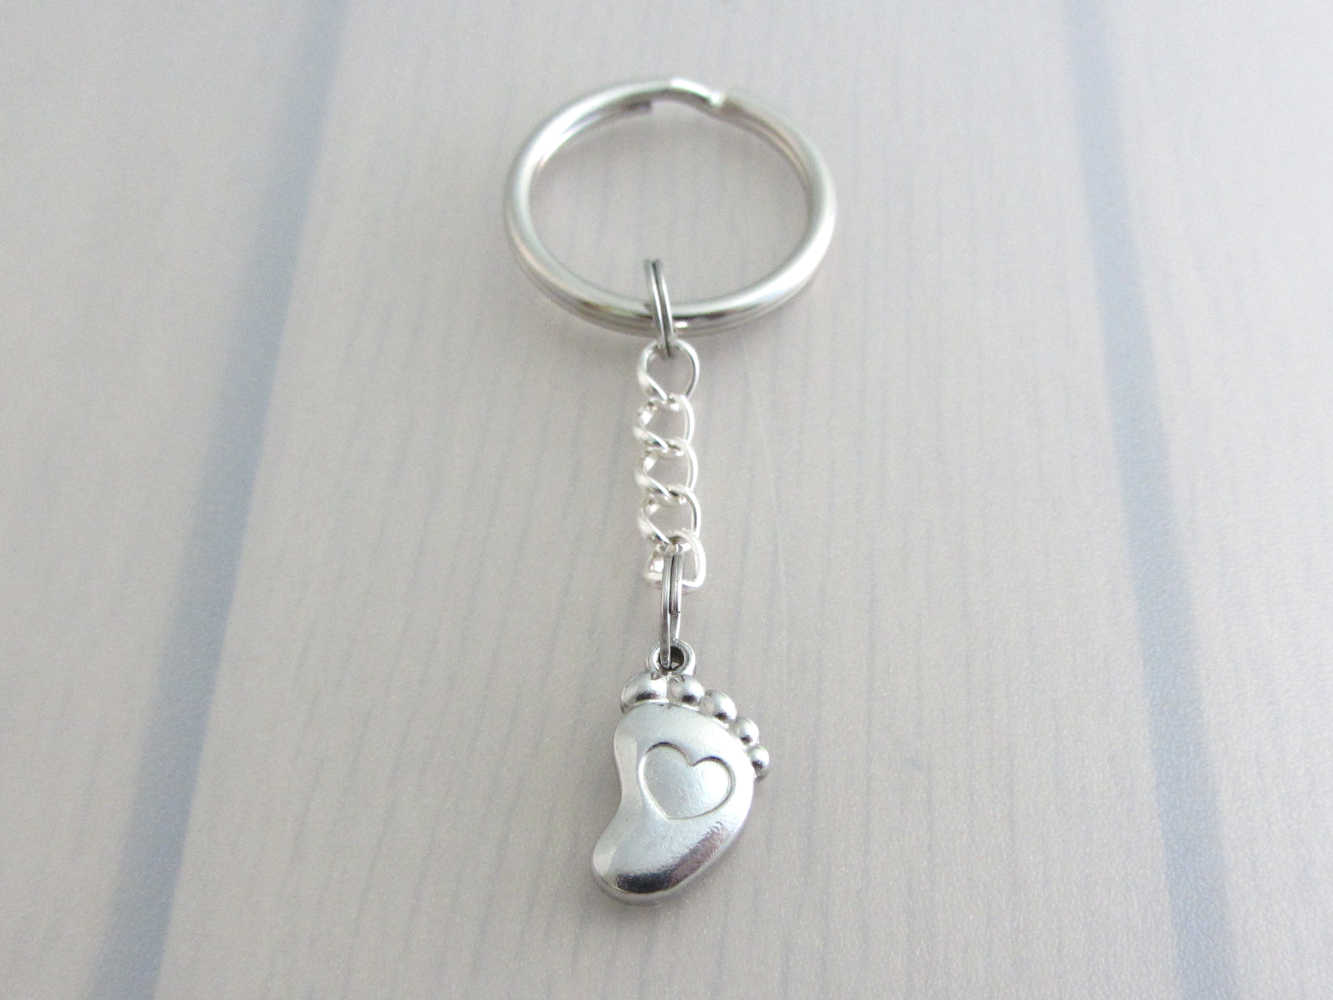 stainless steel single foot charm with indented heart on a chain keyring